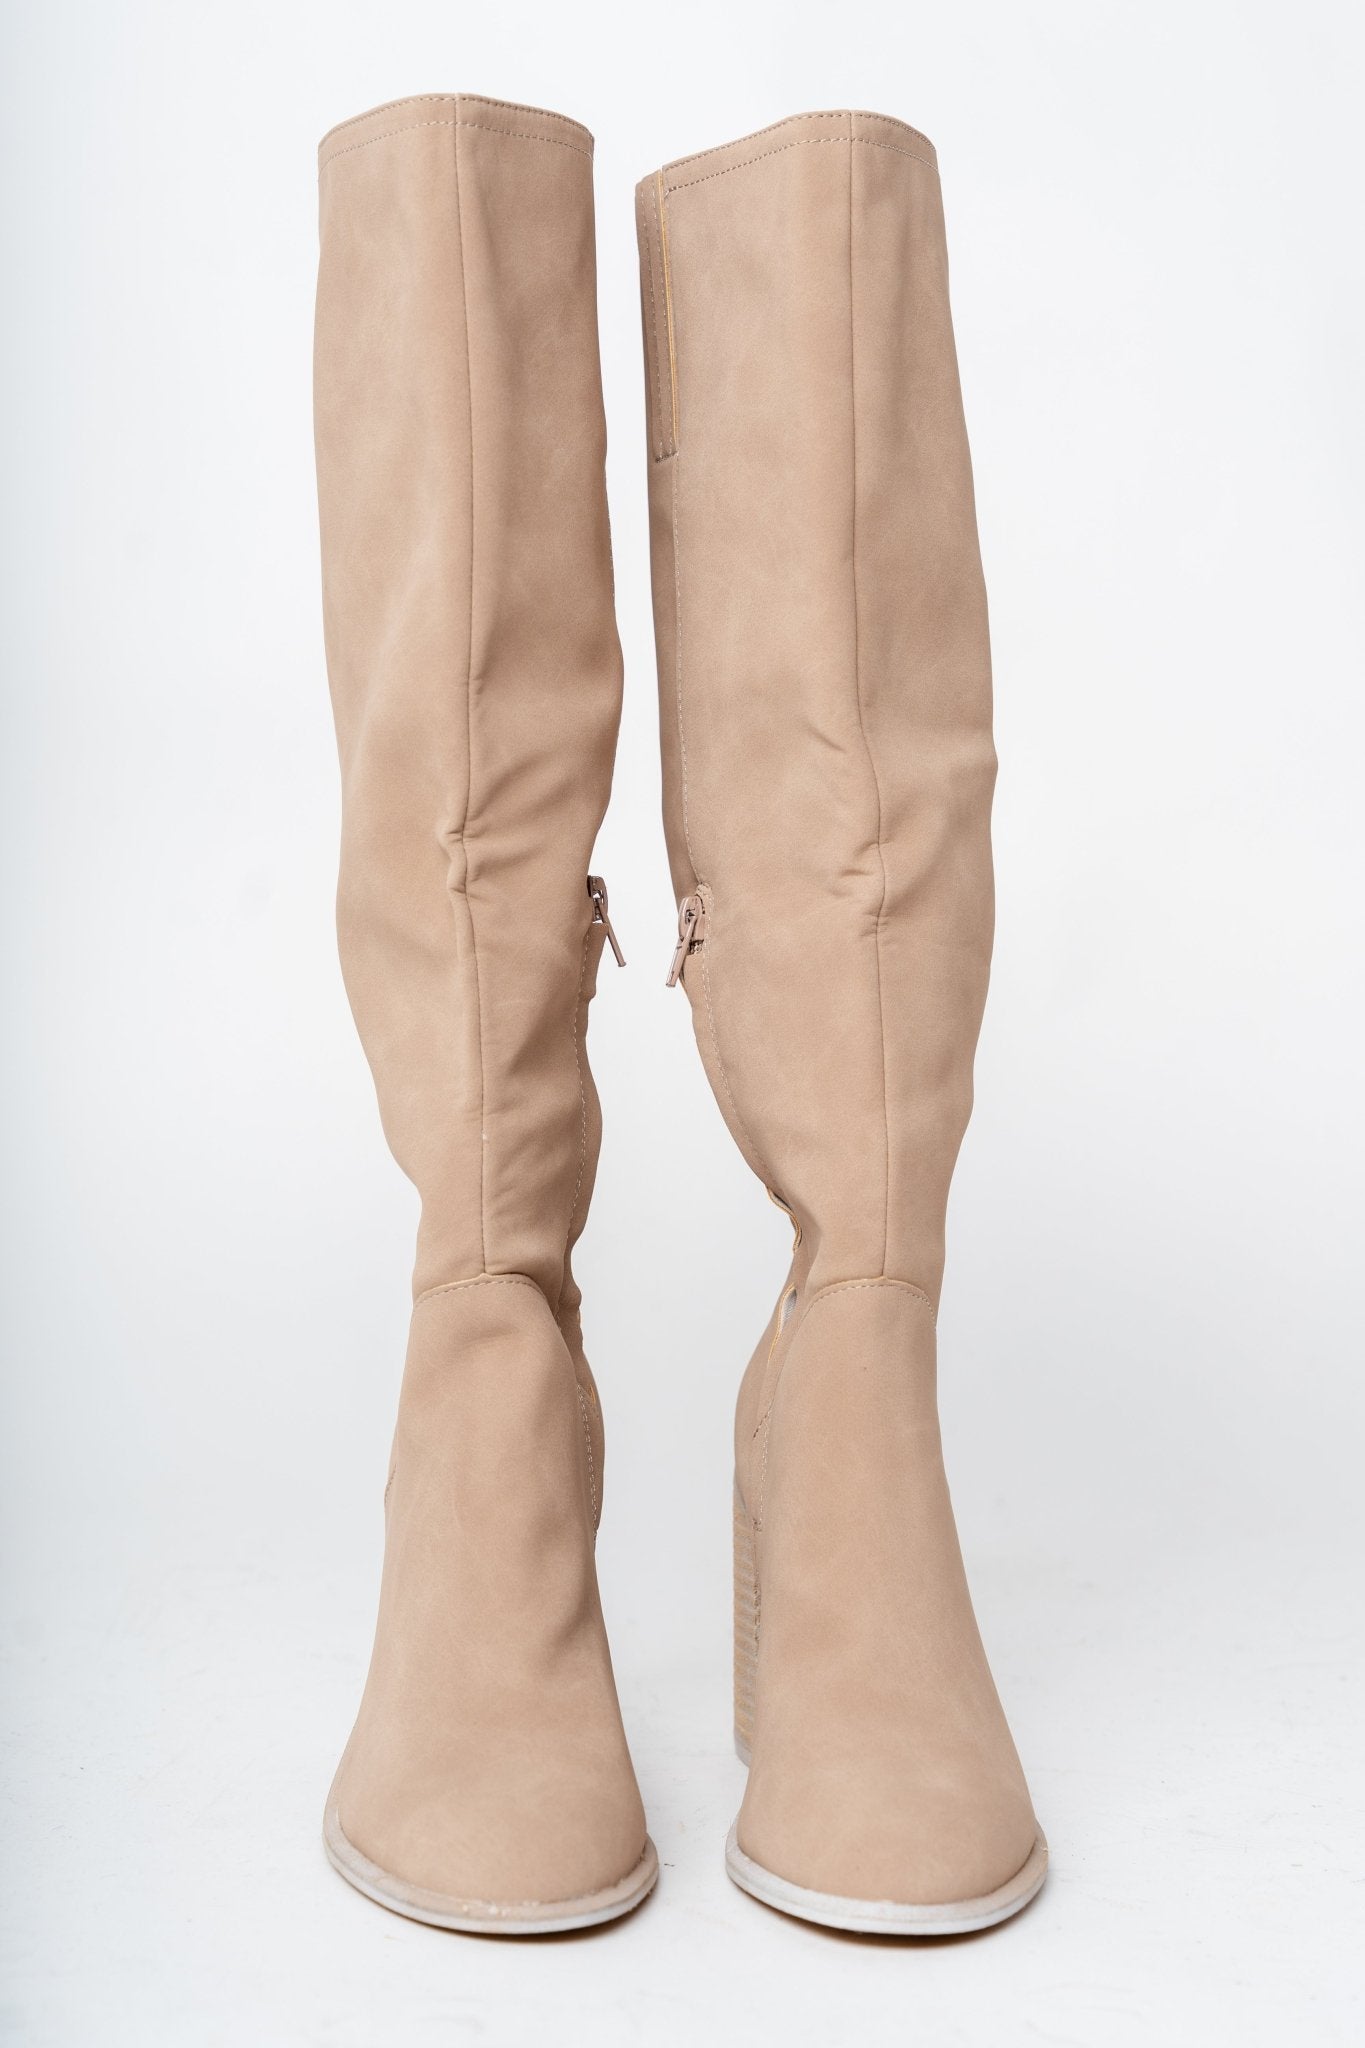 Shiloh knee high boot cedar wood - Trendy shoes - Fashion Shoes at Lush Fashion Lounge Boutique in Oklahoma City